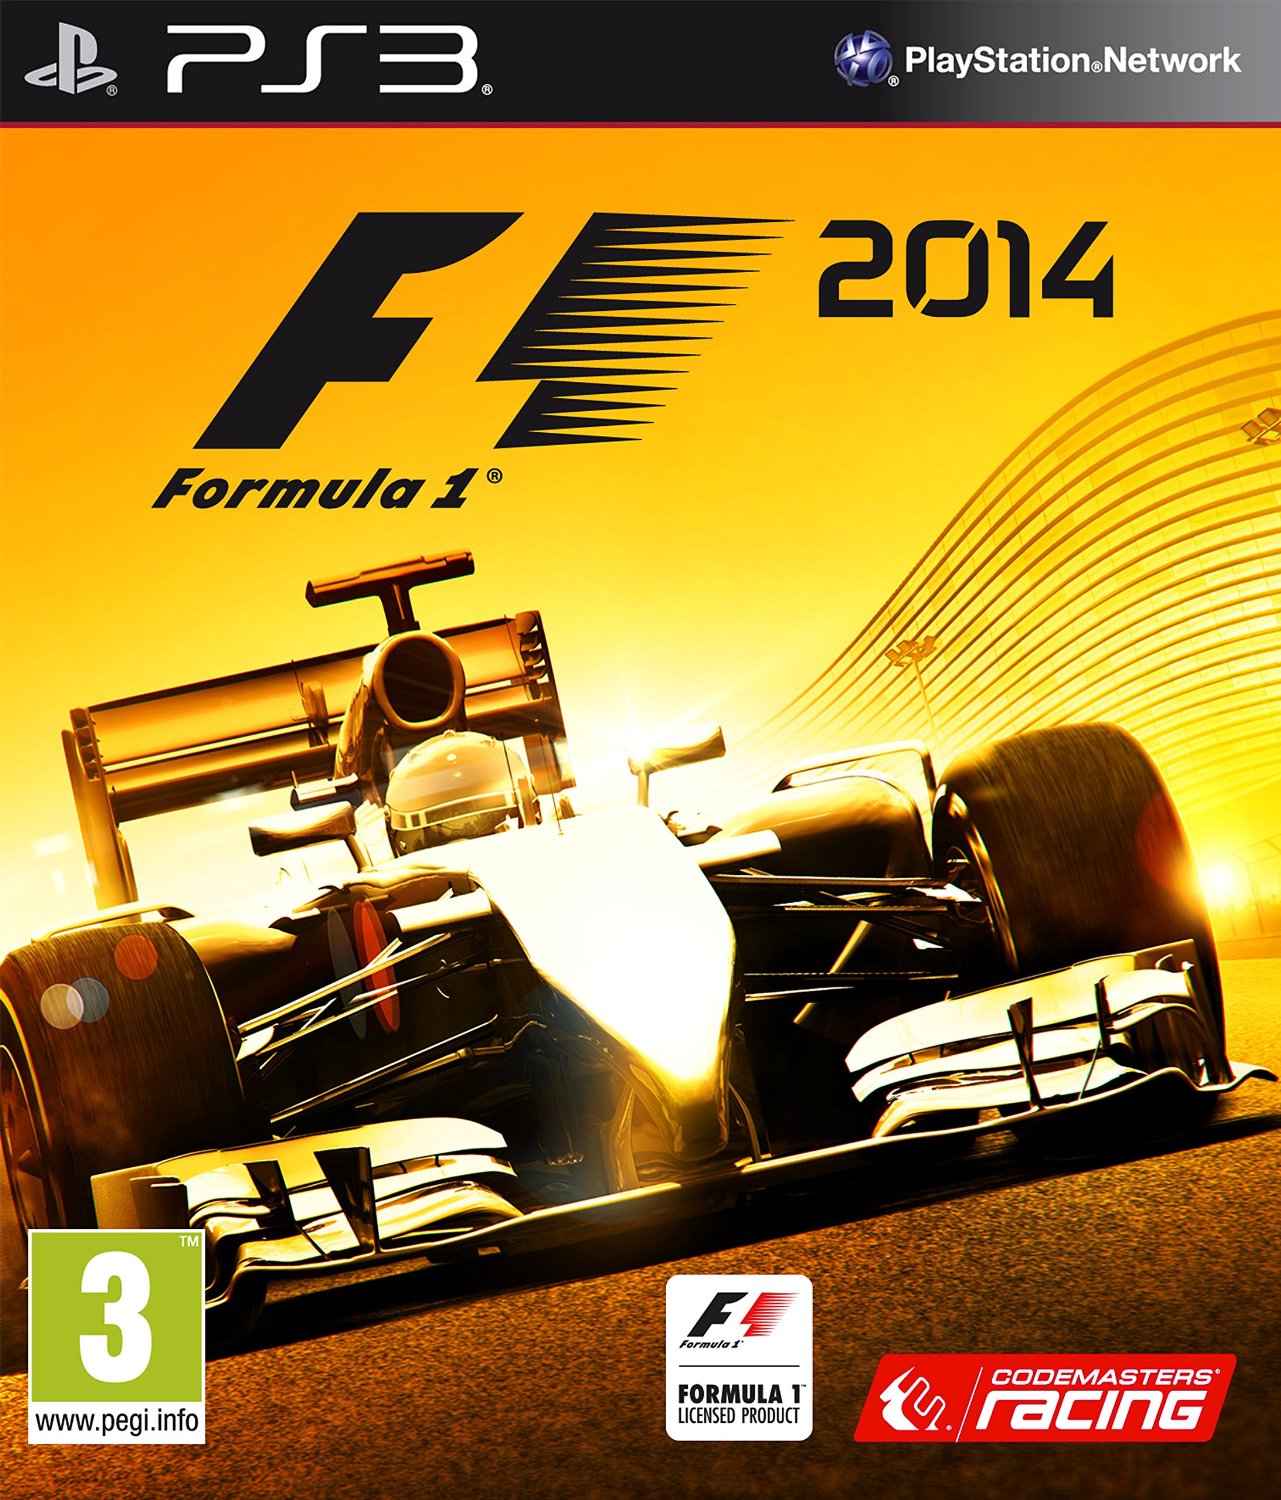 F1 2014 (video game) The Formula 1 Wiki FANDOM powered by Wikia